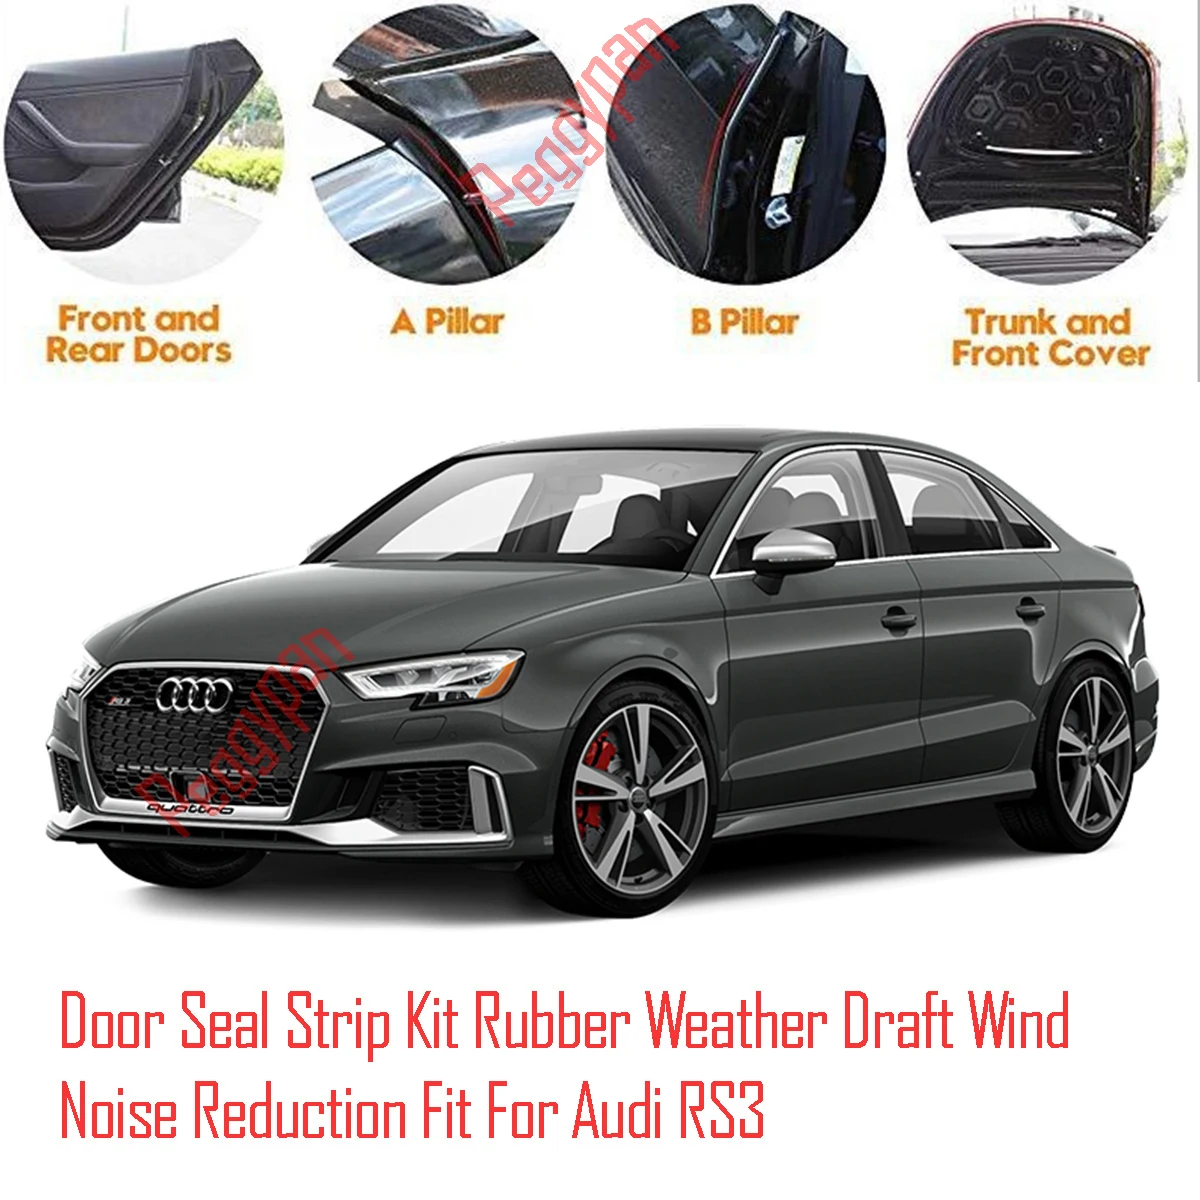 Door Seal Strip Kit Self Adhesive Window Engine Cover Soundproof Rubber Weather Draft Wind Noise Reduction Fit For Audi Audi RS3